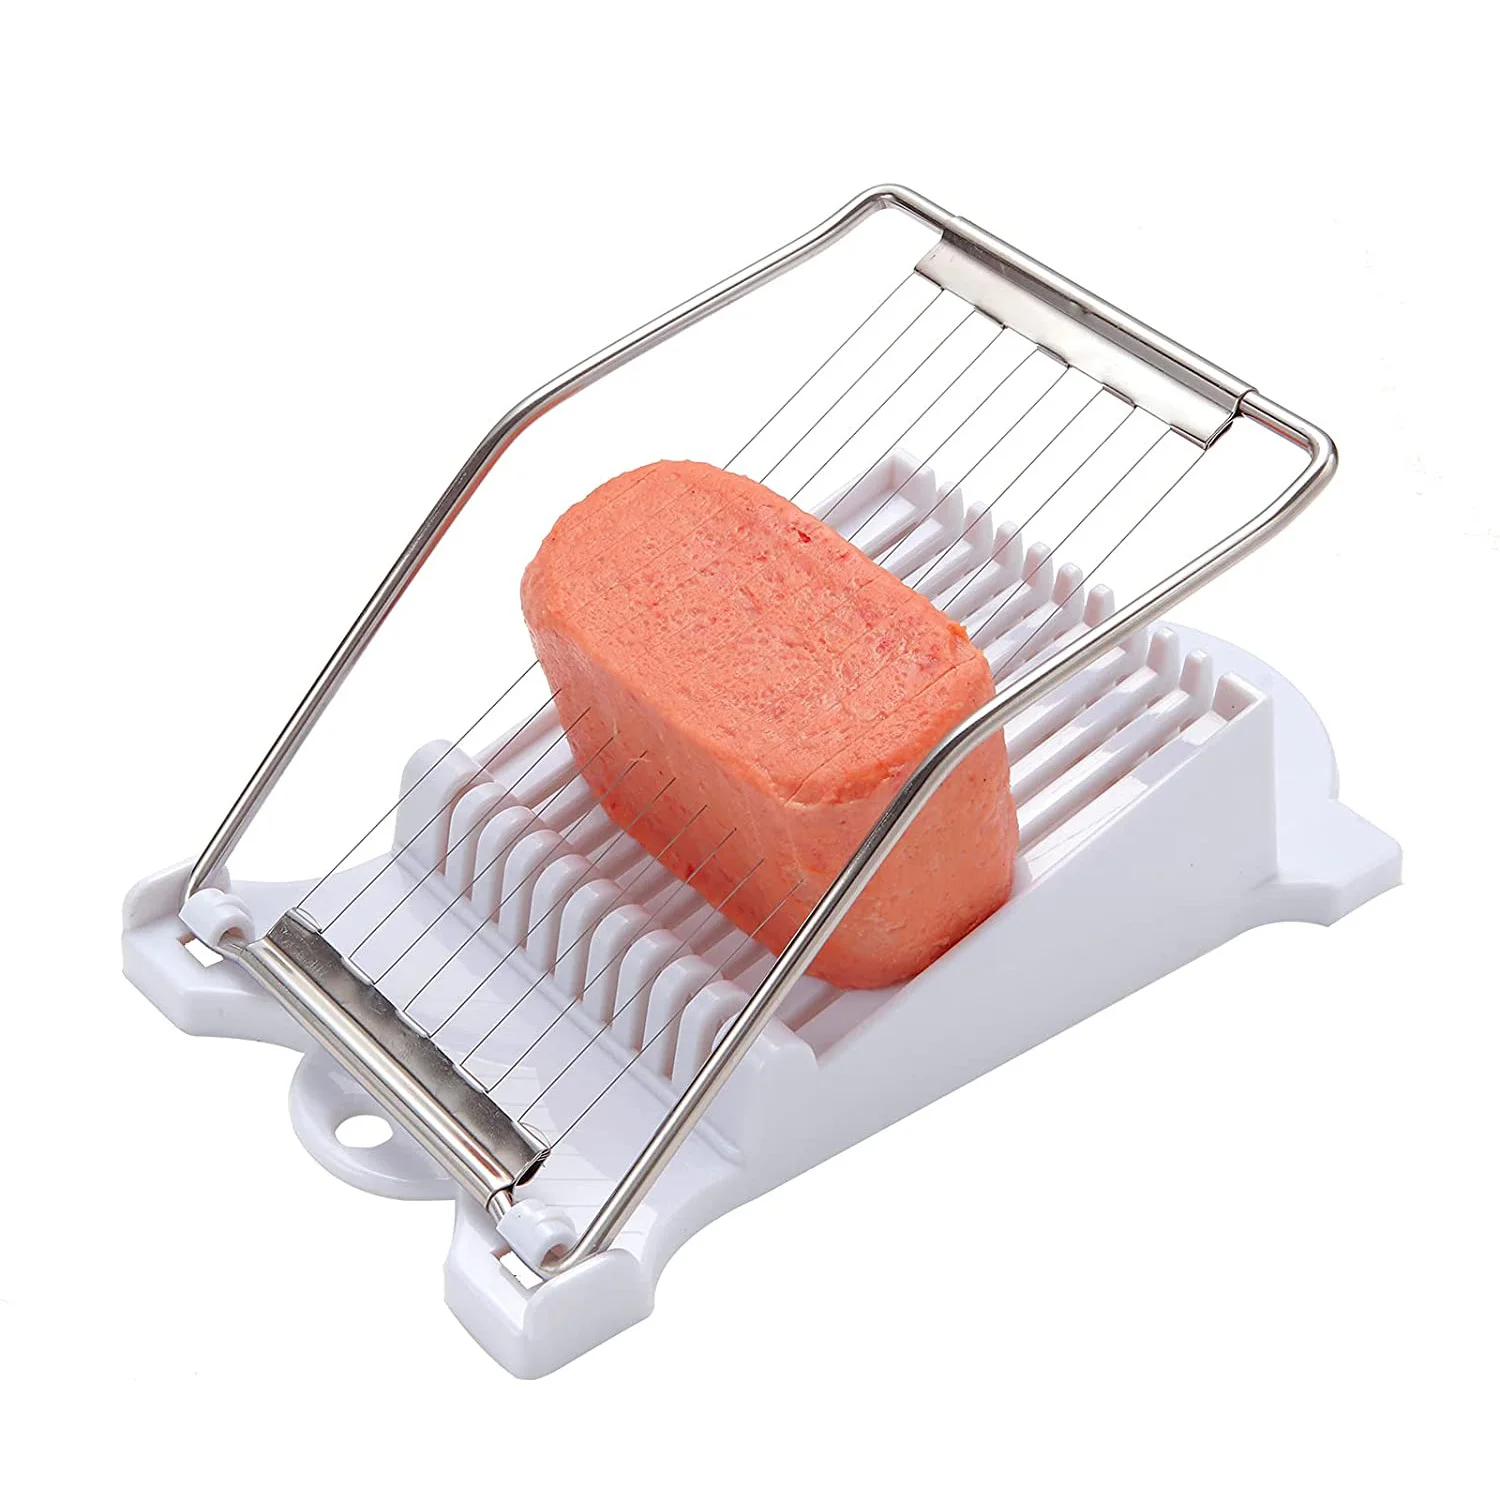 NEW 10 Wires Stainless Steel Soft Food Cutter Egg Fruit Slicer